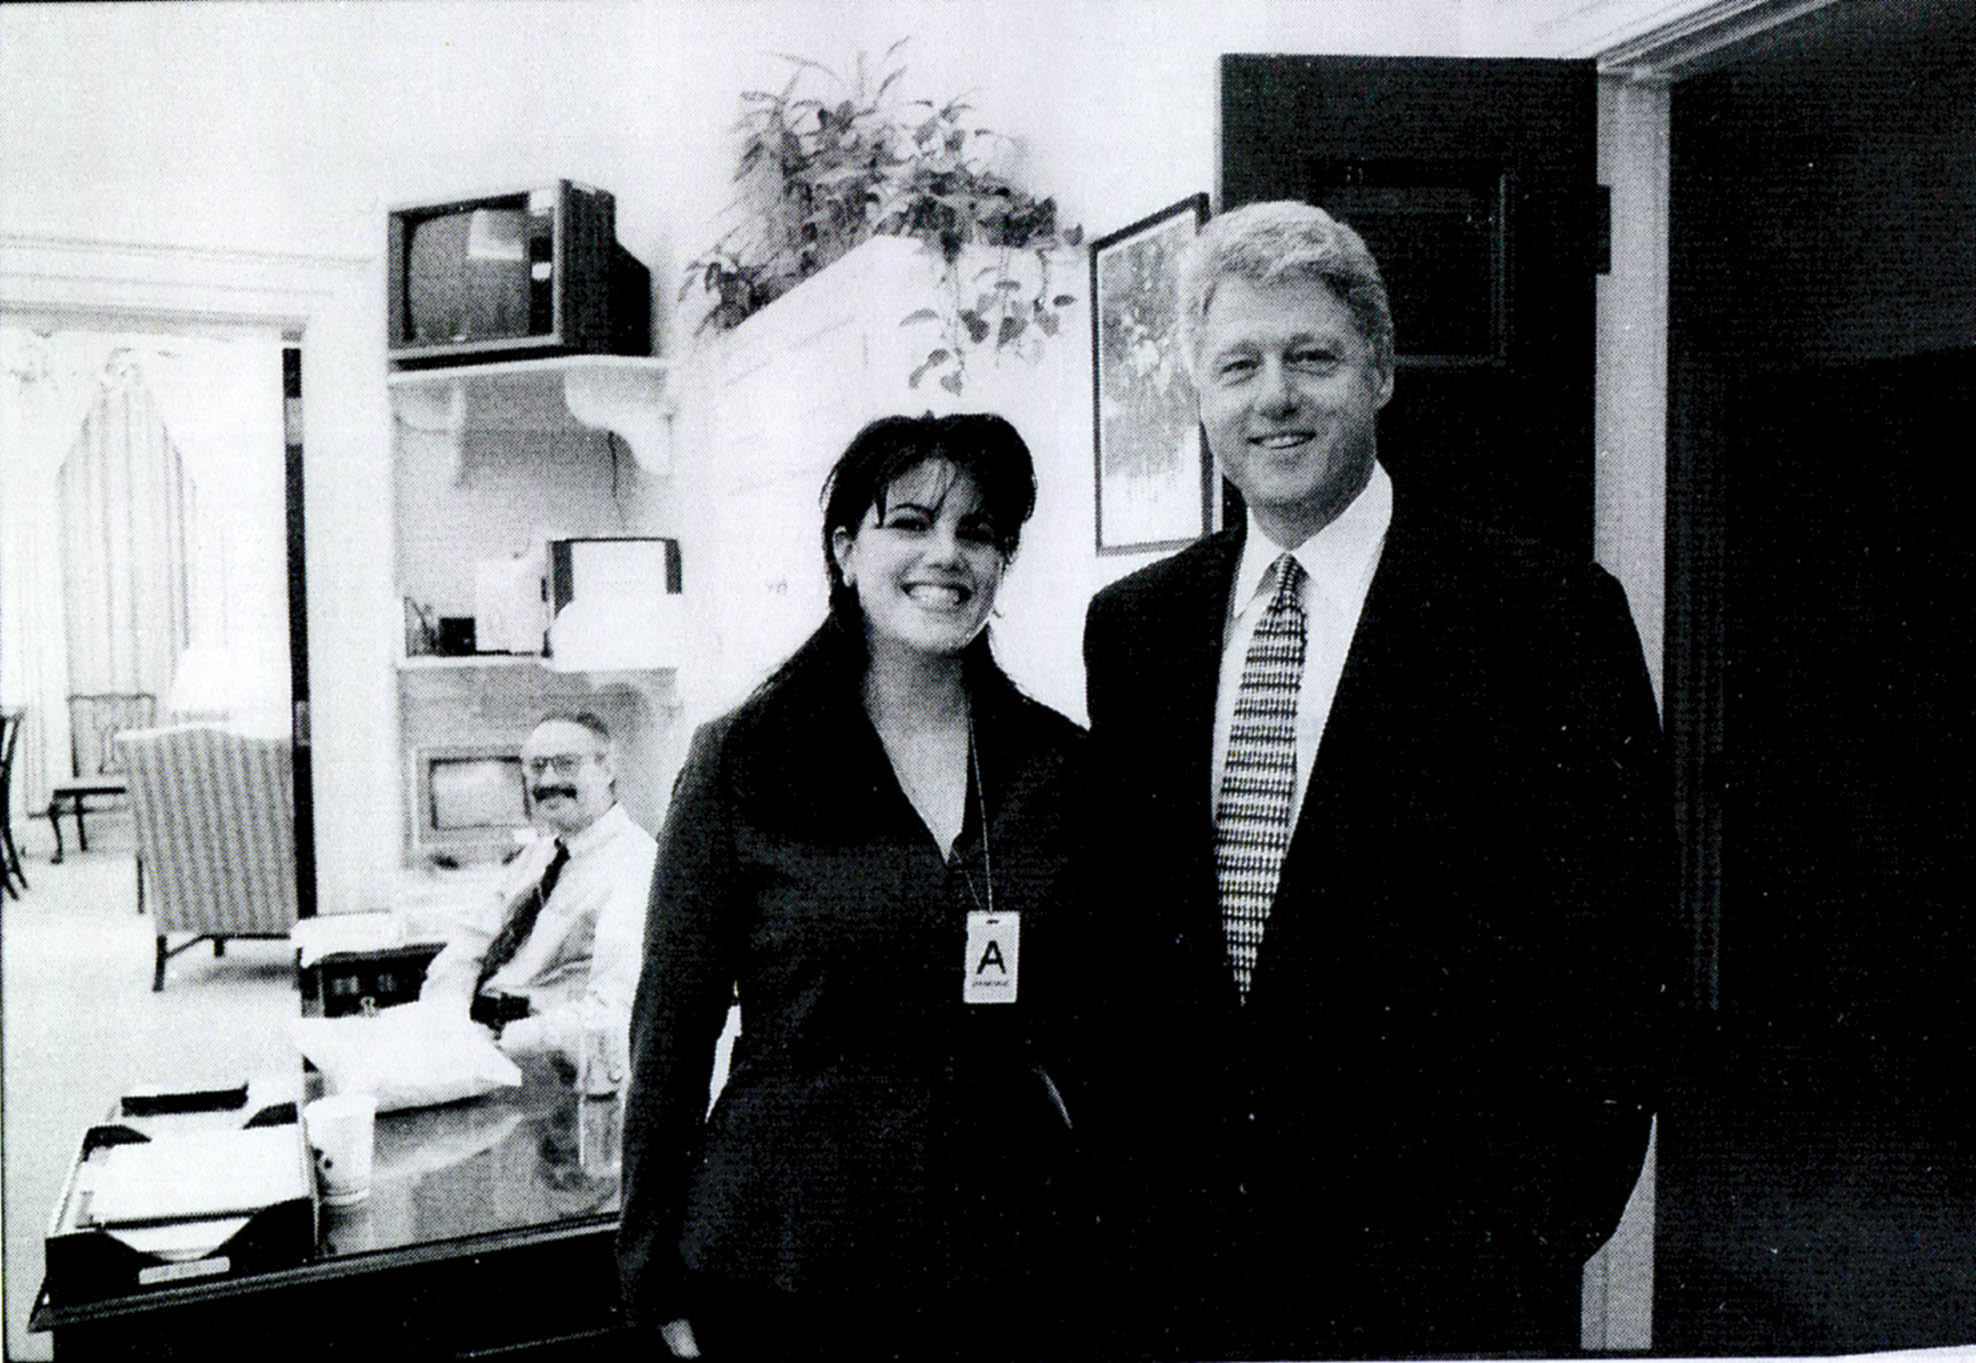 Monica Lewinsky and Bill Clinton at a function held at the White House on September 21, 1998 in Washington D.C. | Source: Getty Images